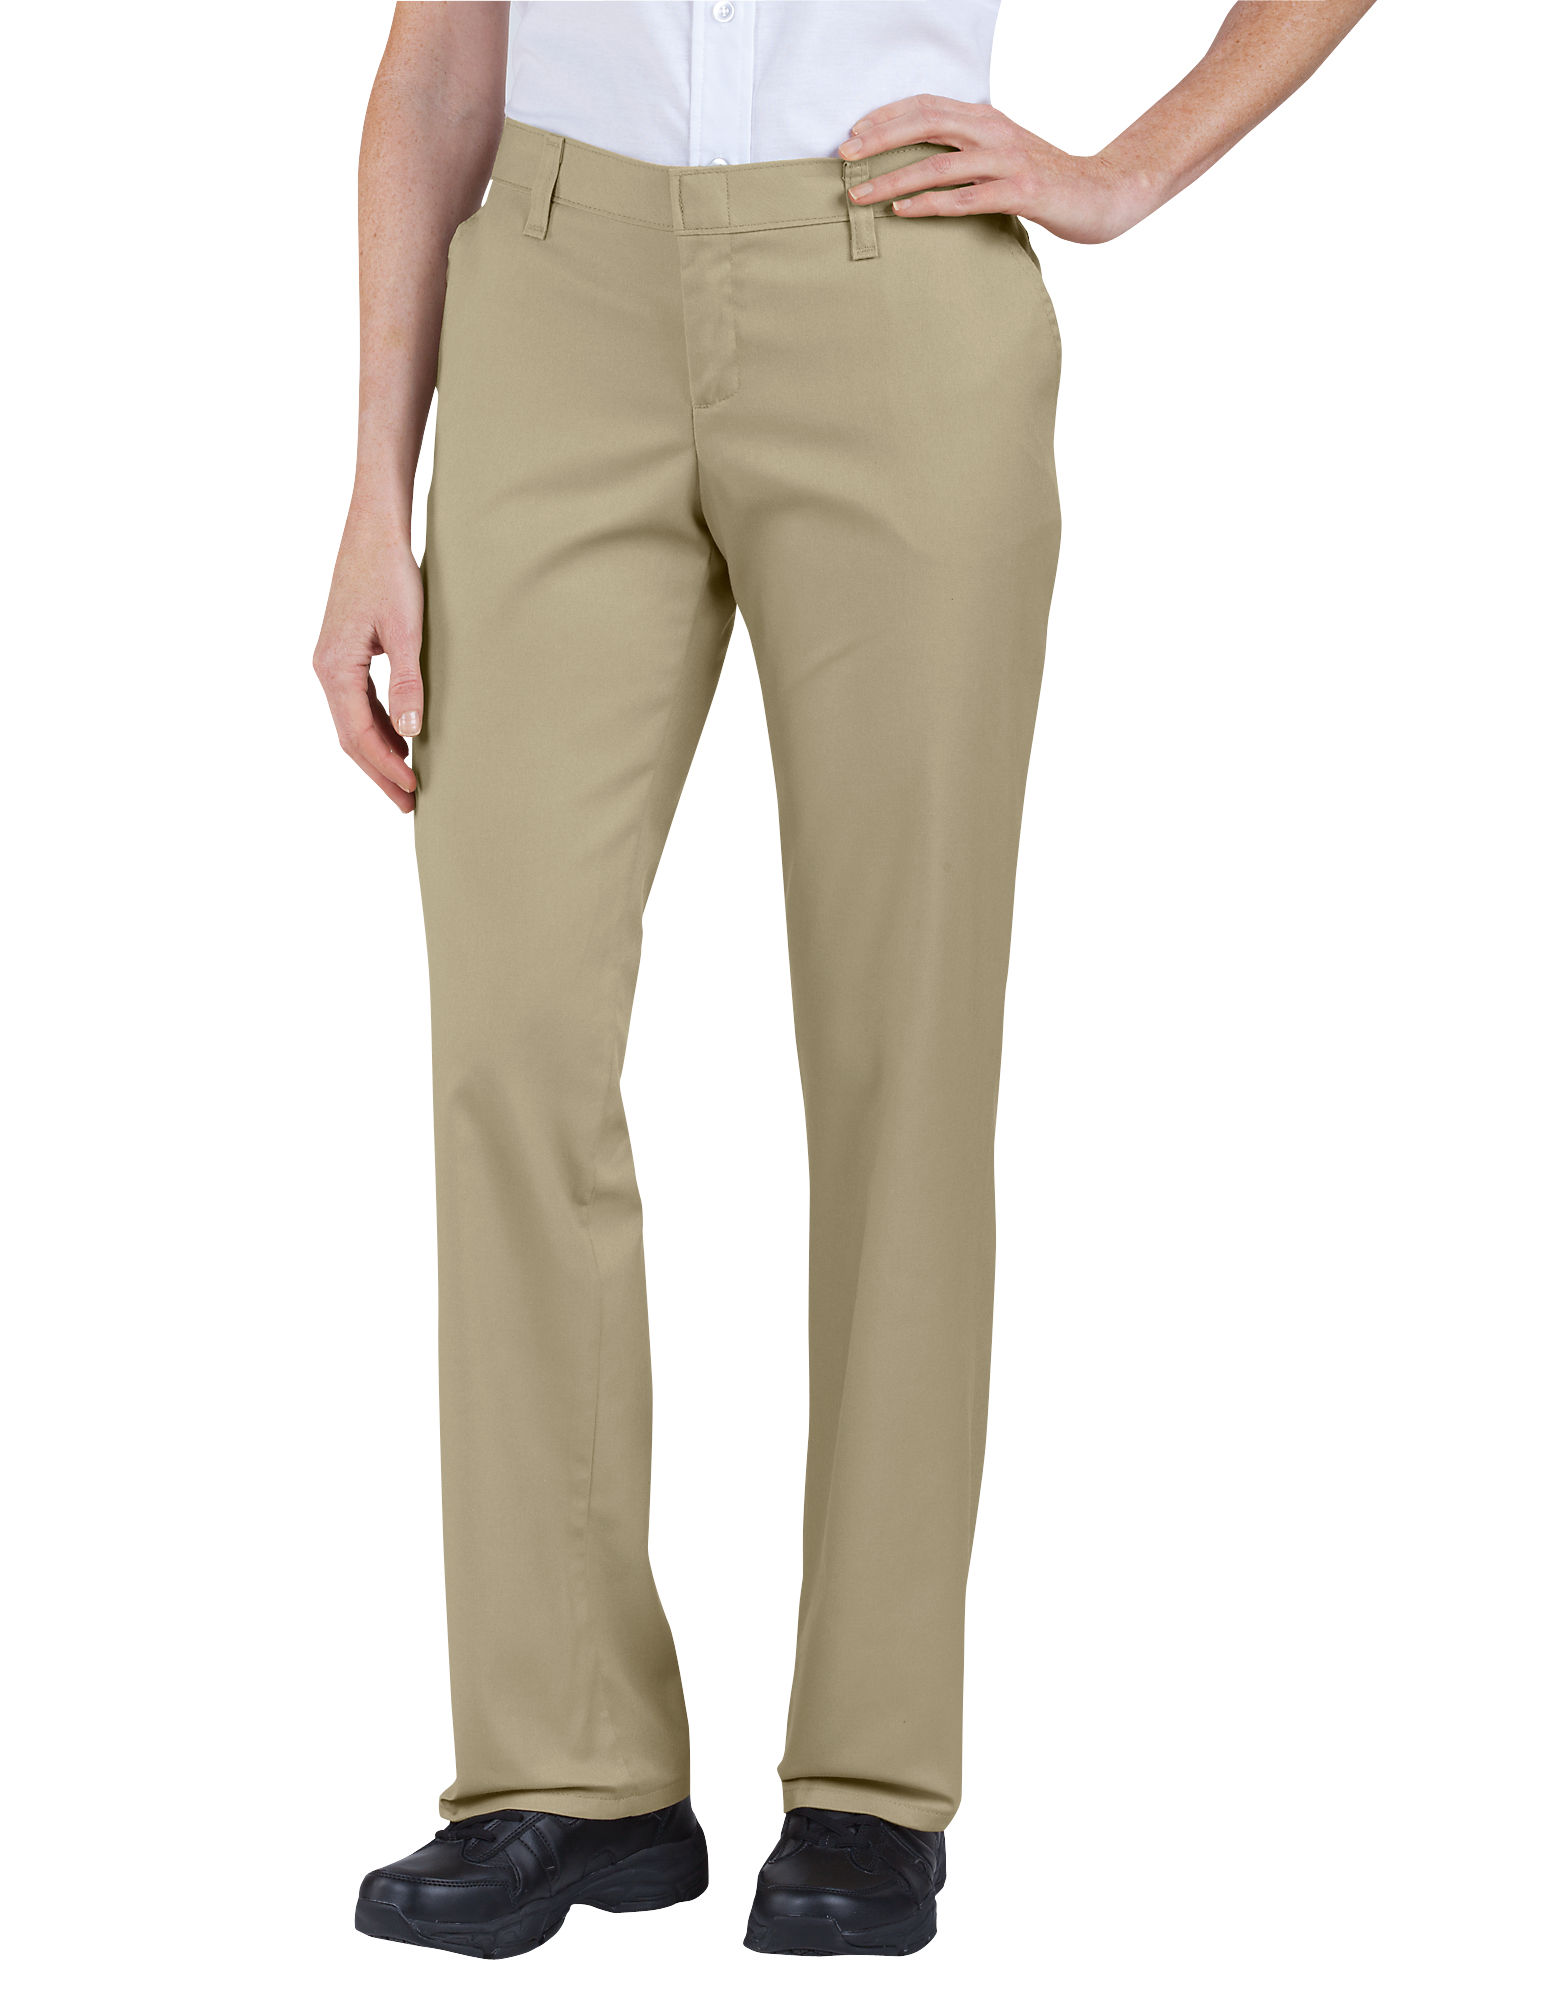 Dickies Women's Premium Relaxed Straight Flat Front Pants - Siegel's ...